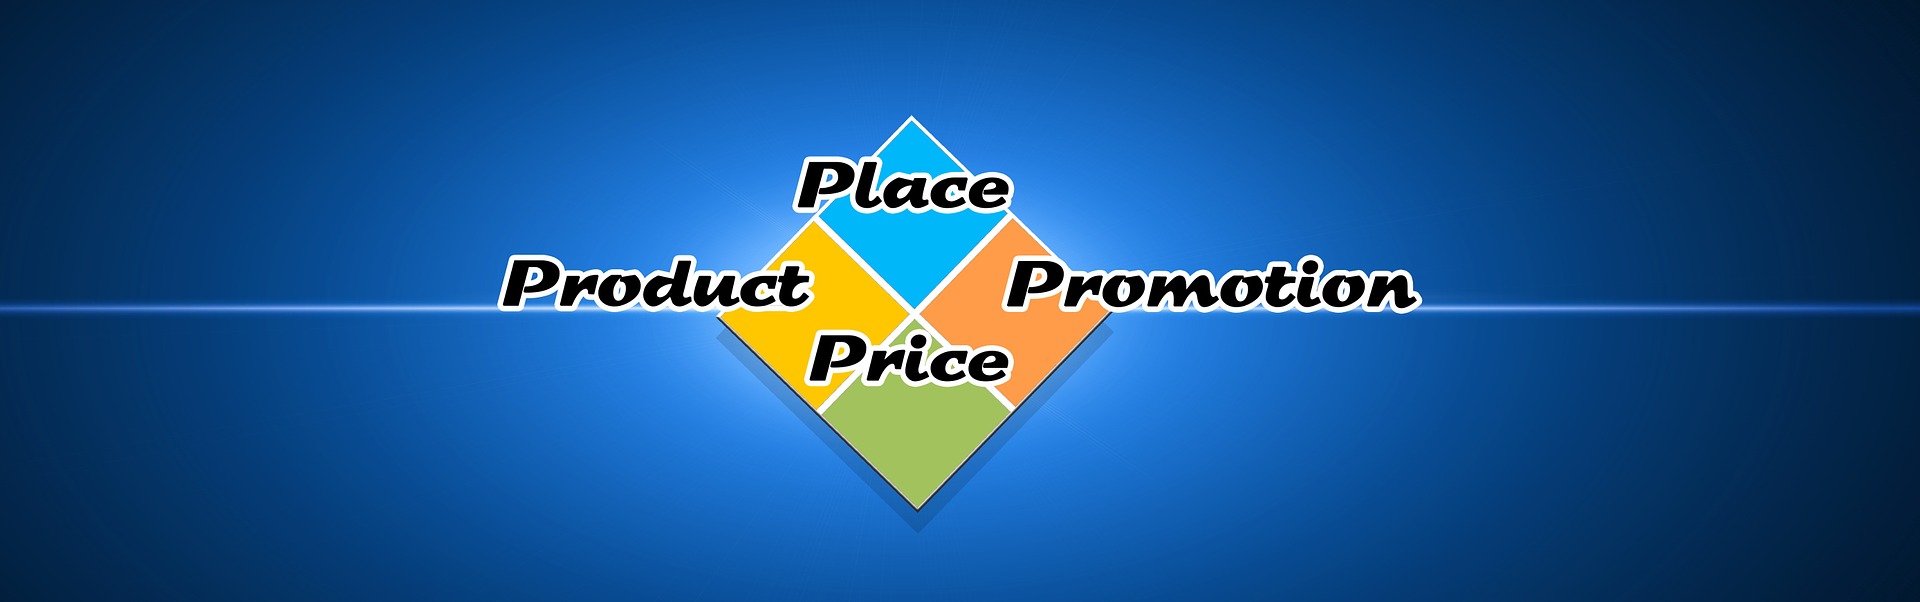 Product - Price - Place - Promotion